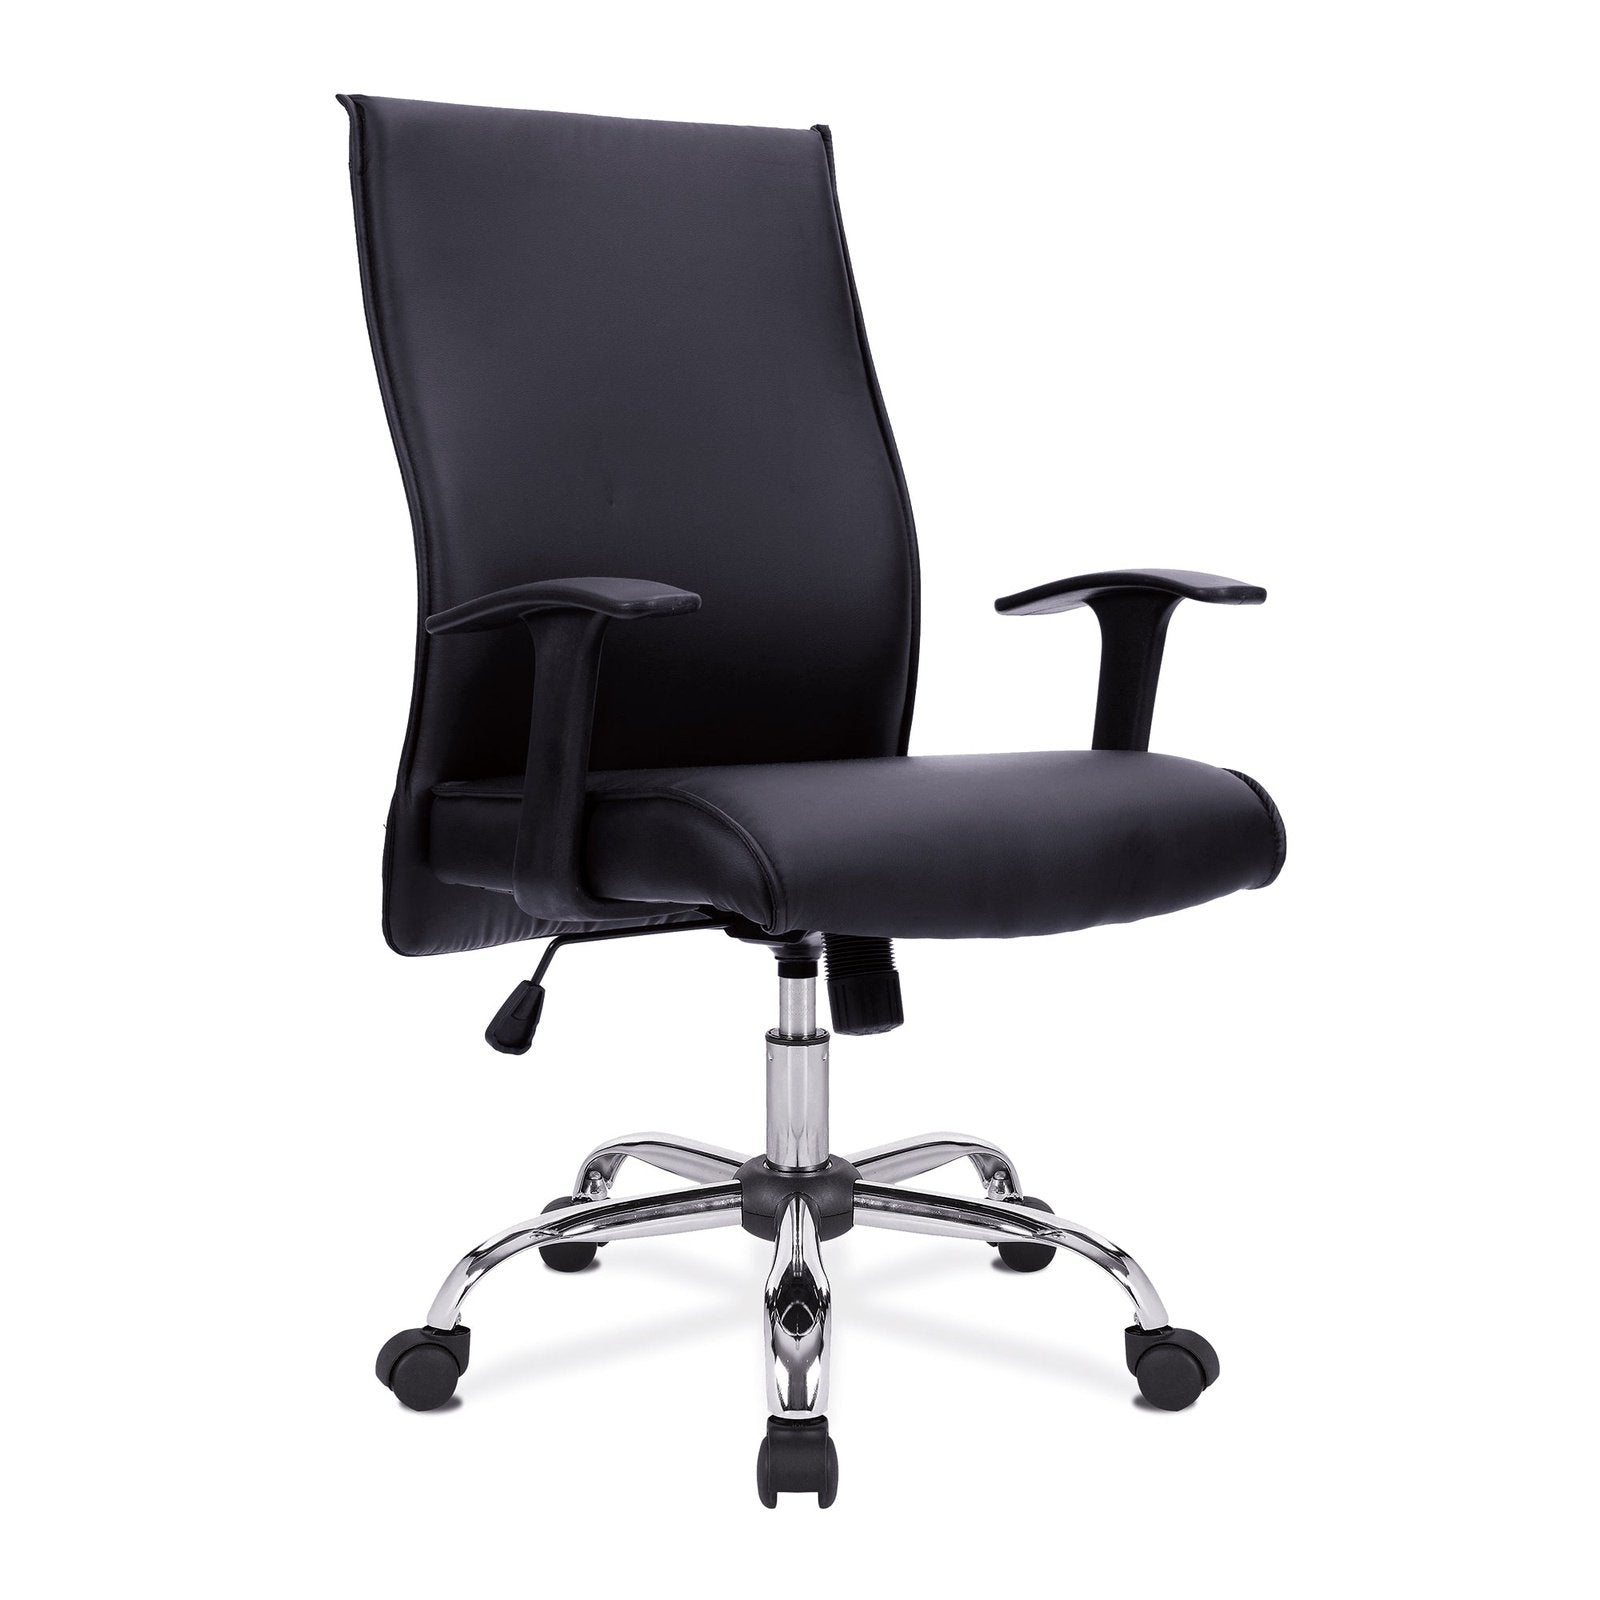 Shirt-Tail Leather Faced Executive Armchair with Chrome Base - Black - Office Products Online